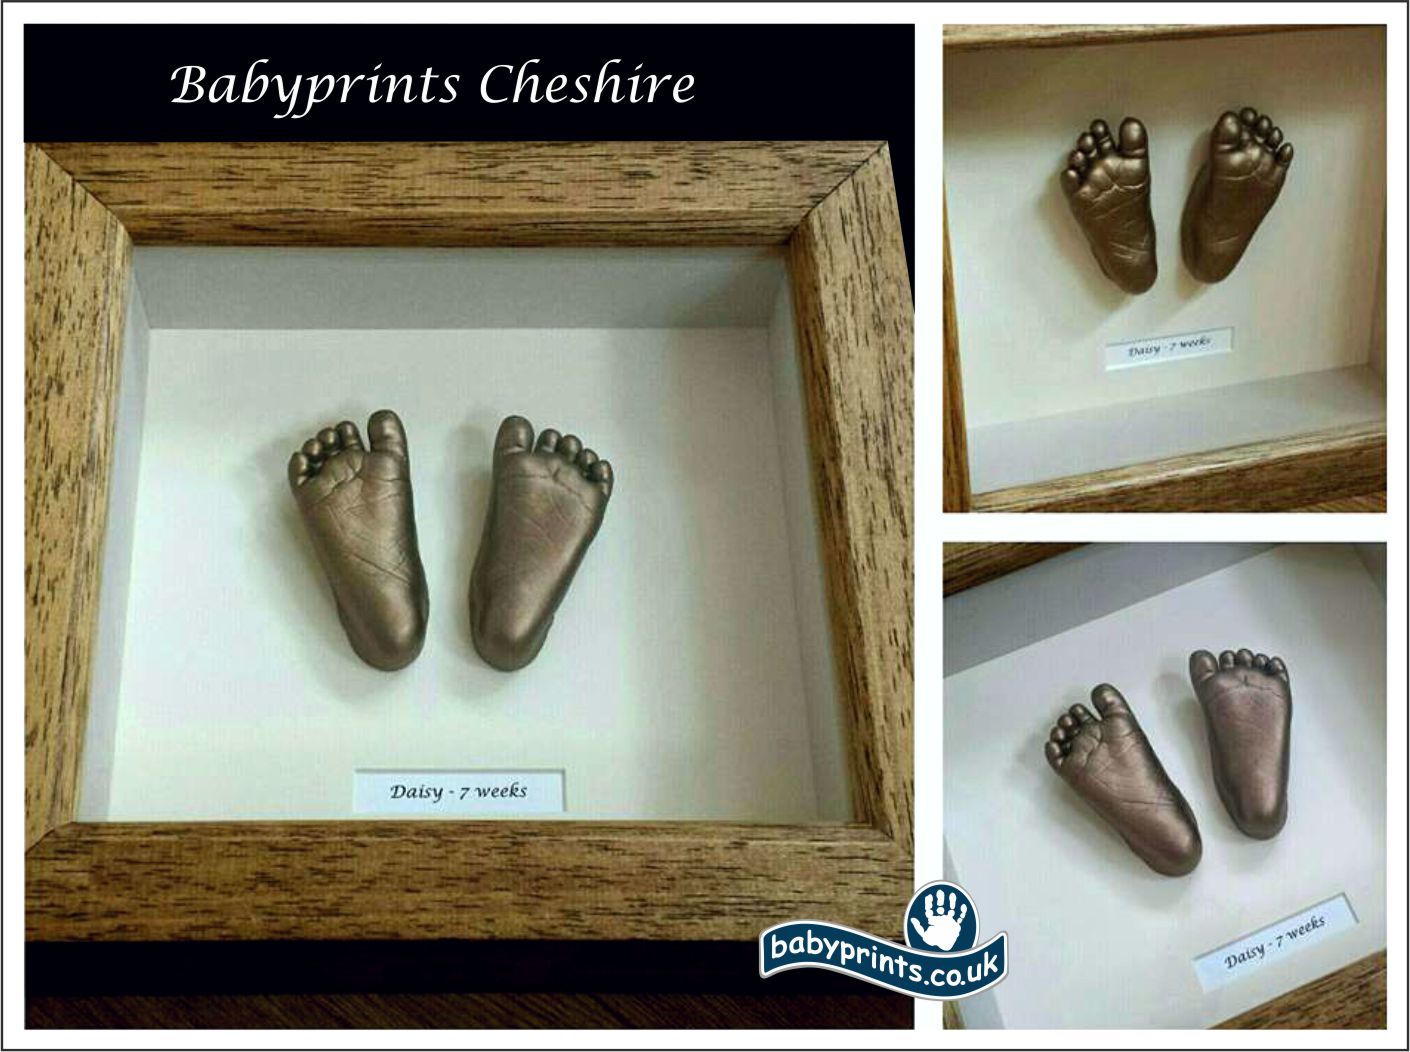 Baby feet casts framed by Babyprints Cheshire